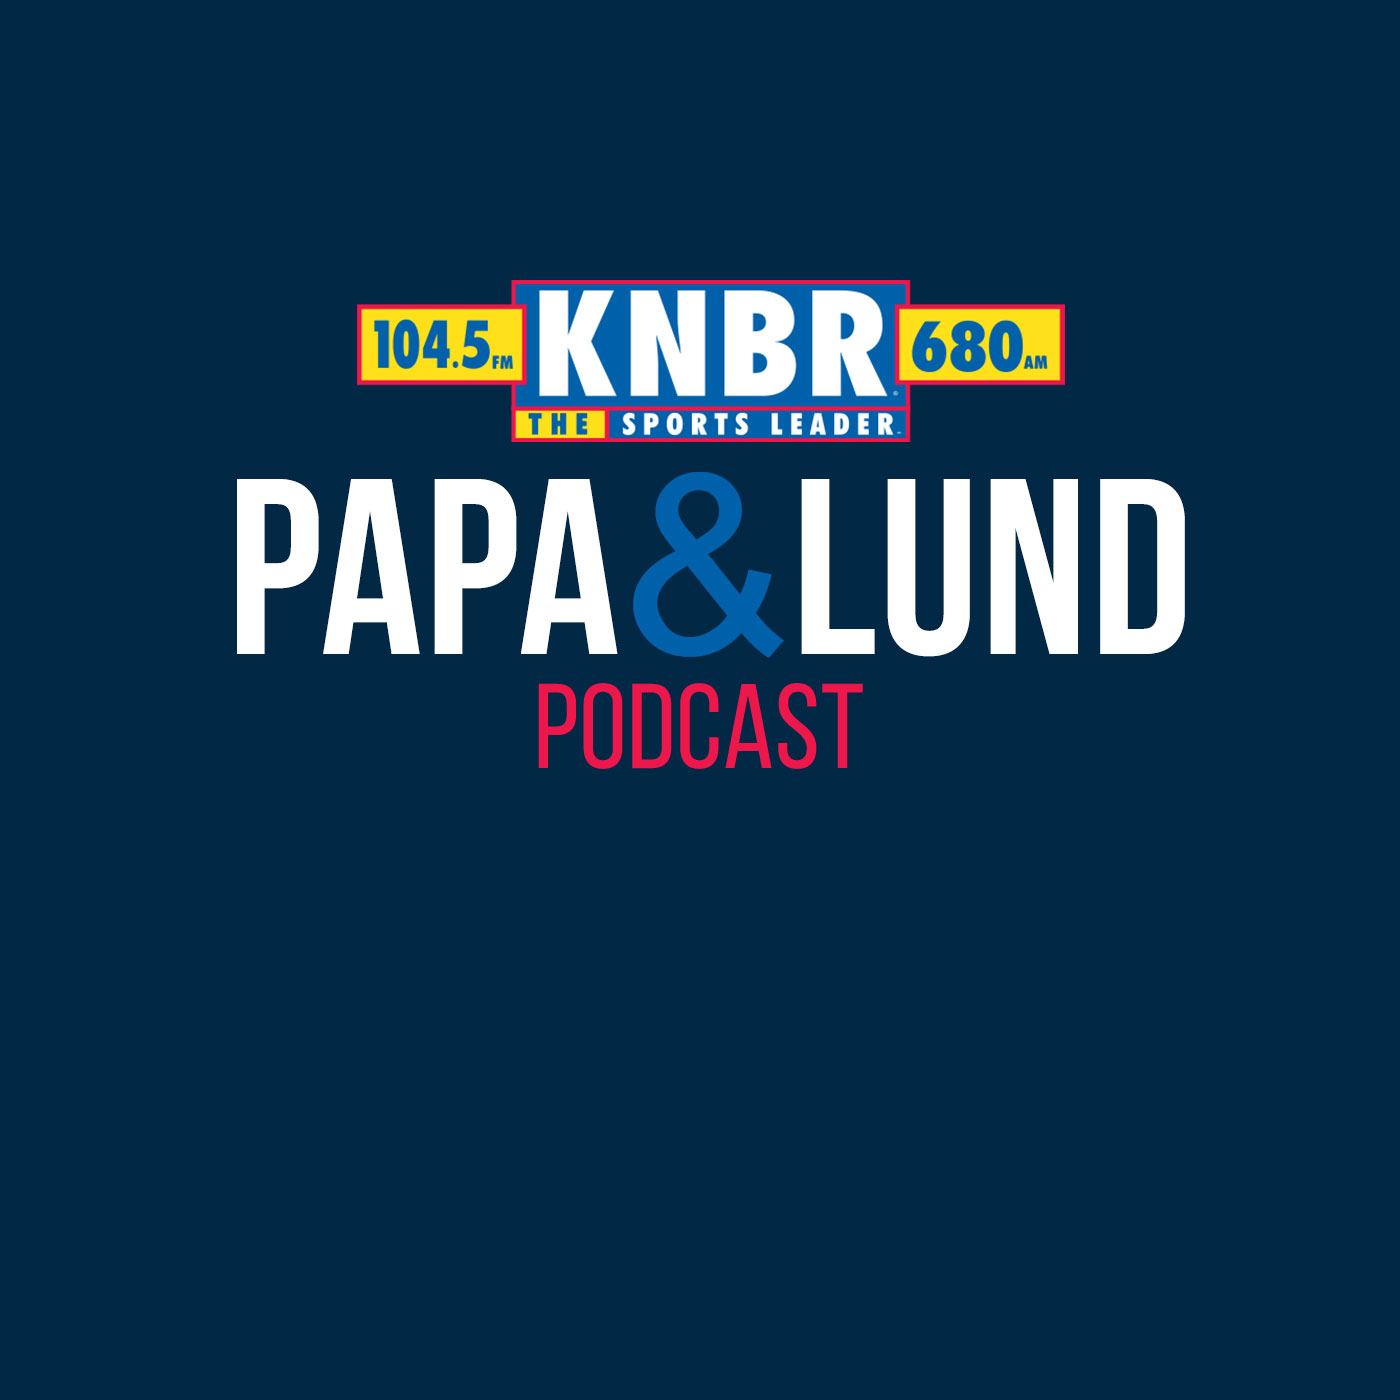 11-8 Matt Barrows joins Papa & Lund to discuss the return to practice for some key 49ers after the Bye Week and how they are poised to make a signature 2nd half run